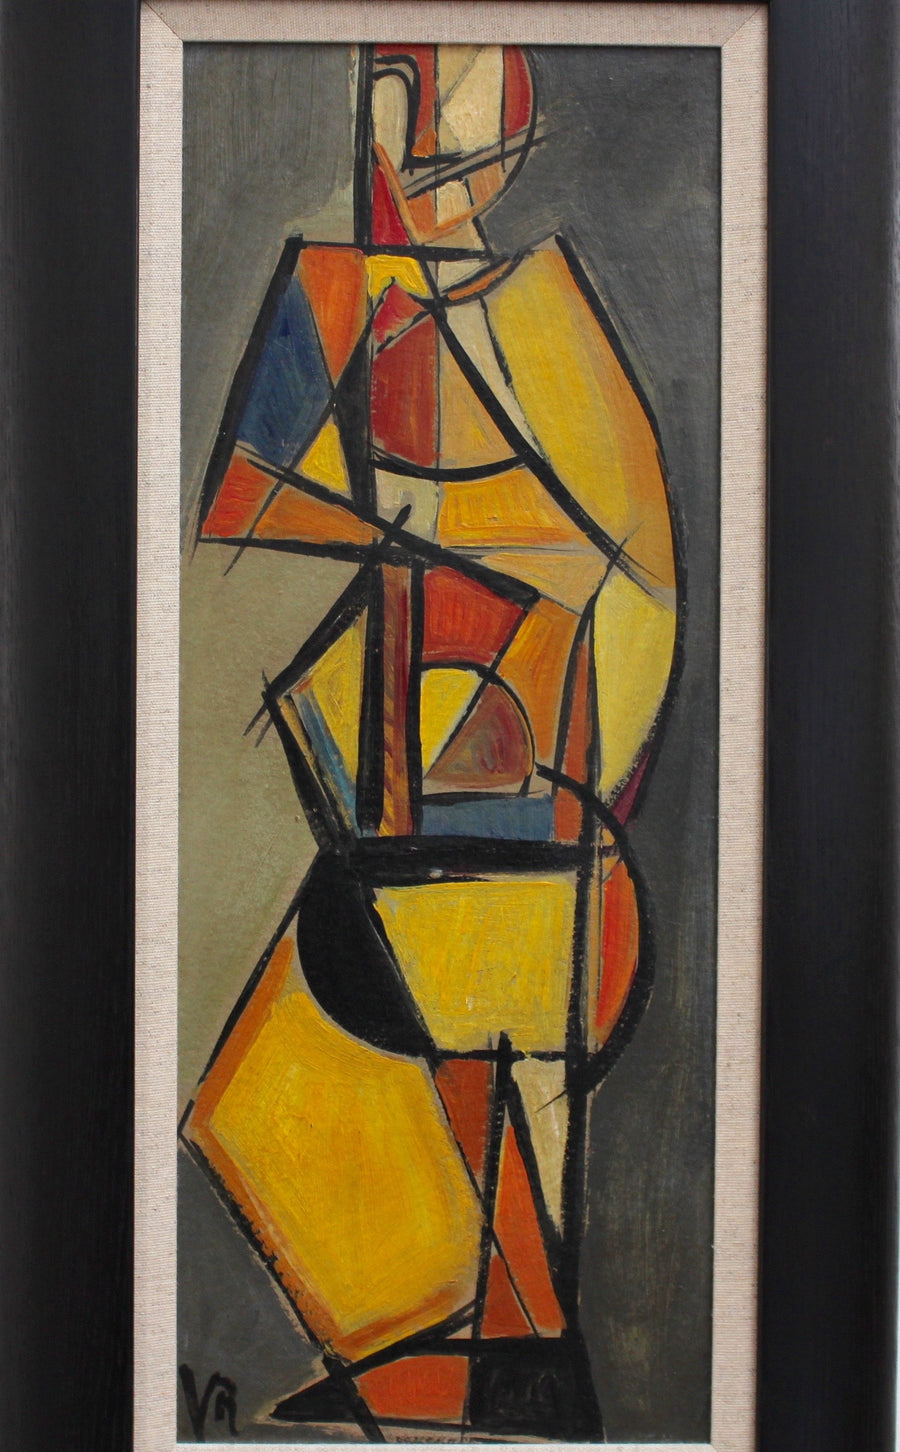 'Pizzicato' Double Bass Player by V.R. (circa 1940s - 50s)